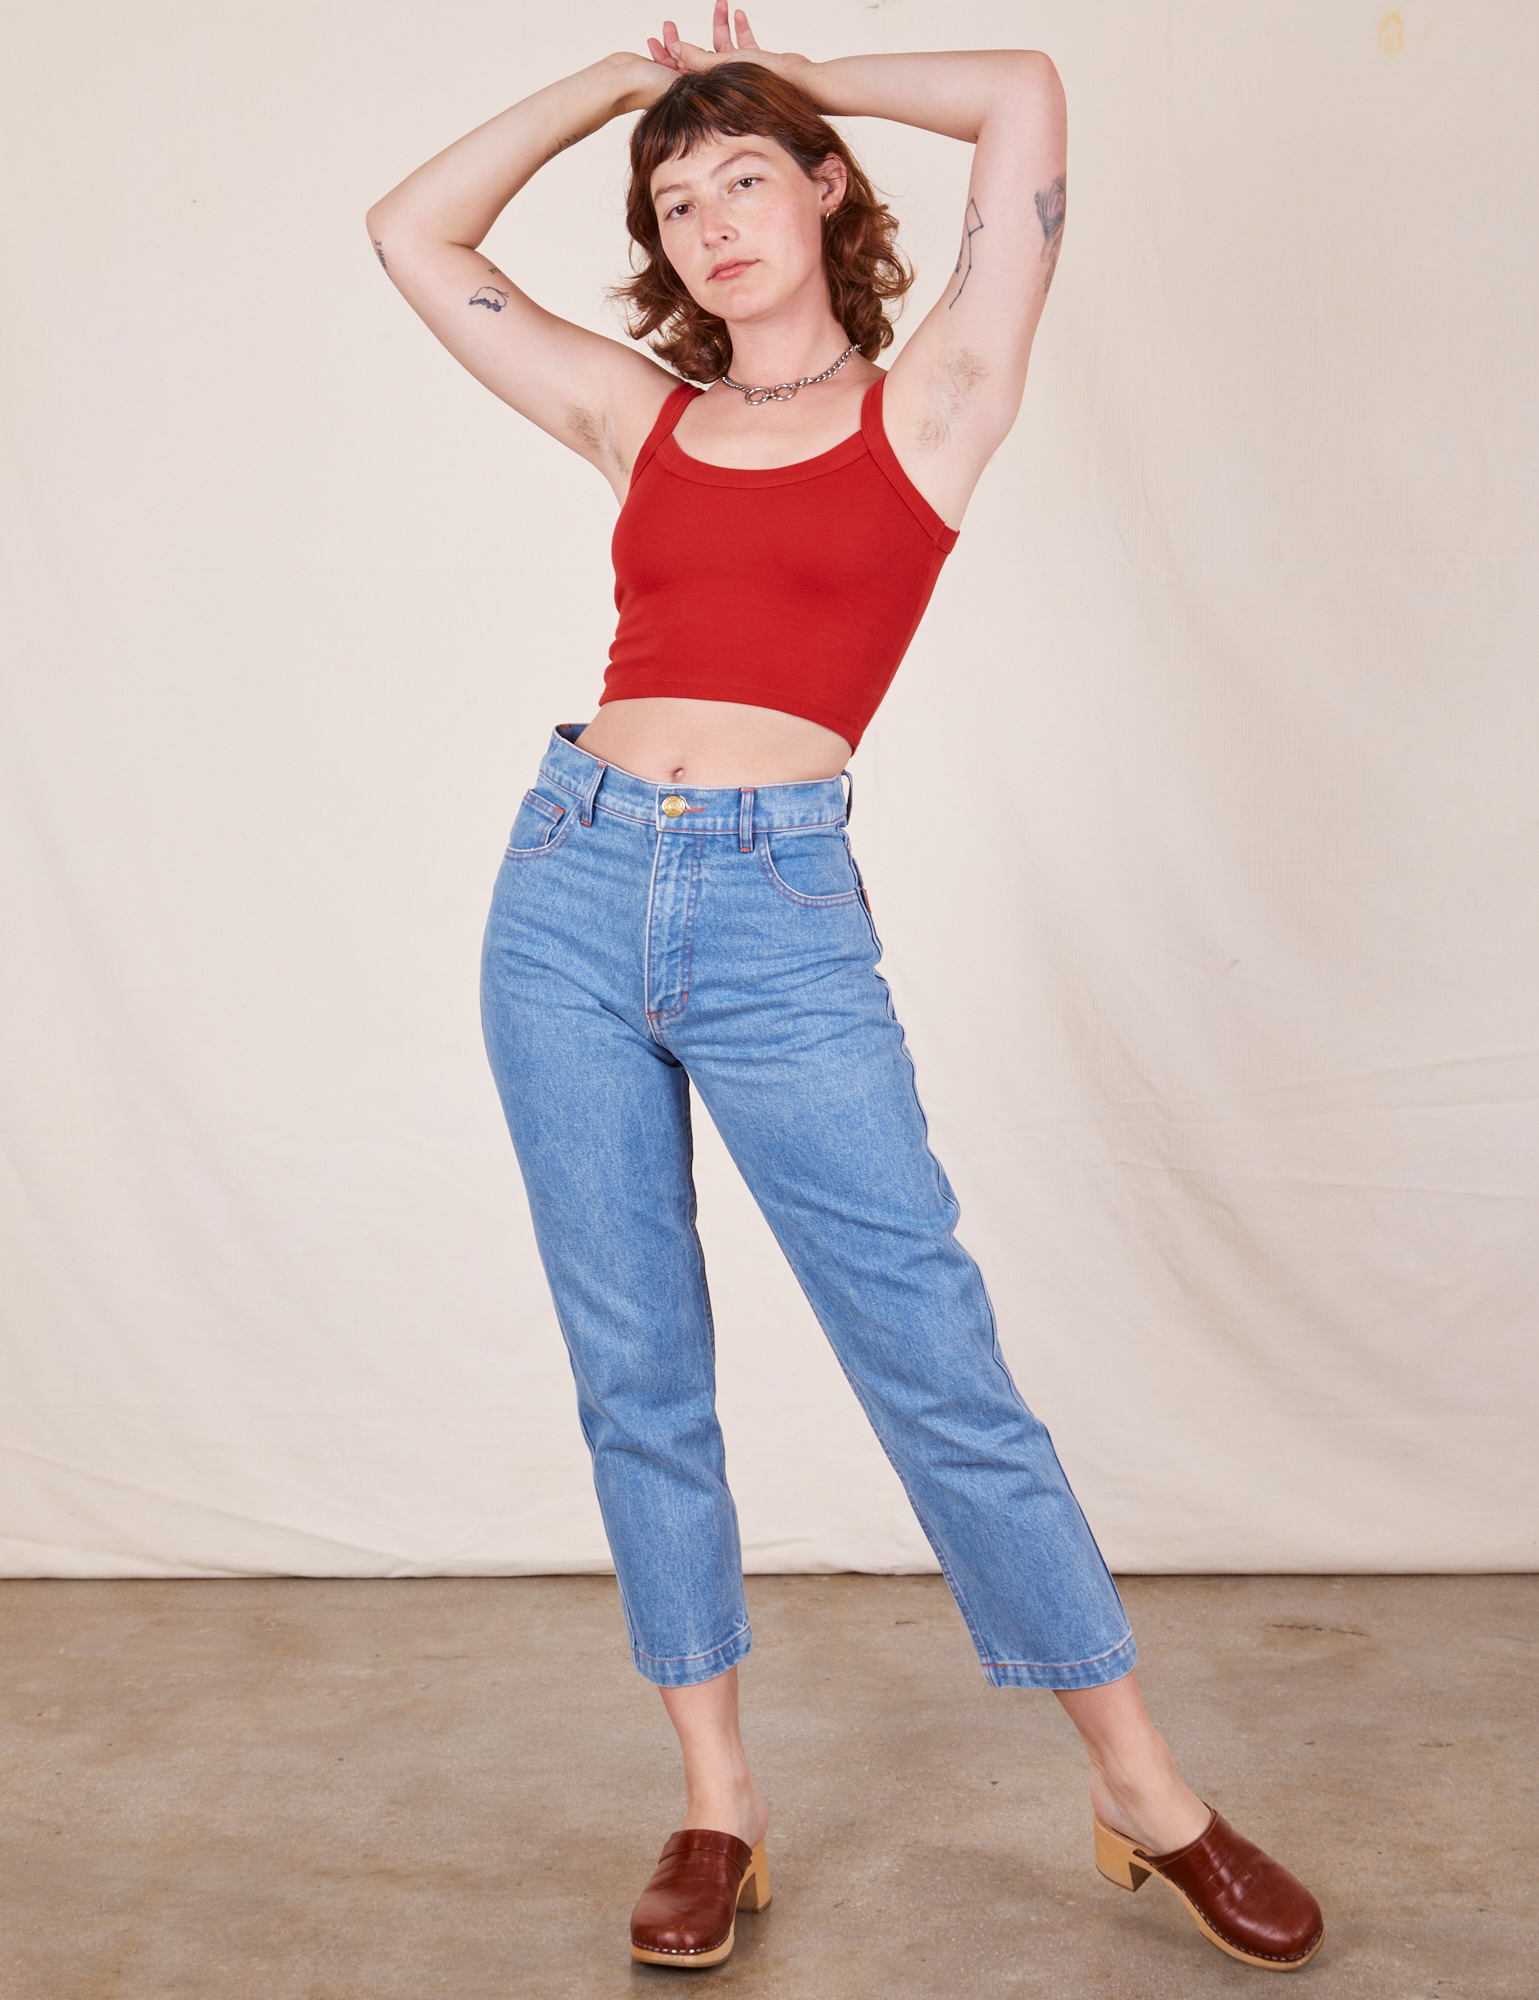 Alex is 5'8" and wearing P Cropped Cami in Mustang Red paired with light wash Frontier Jeans